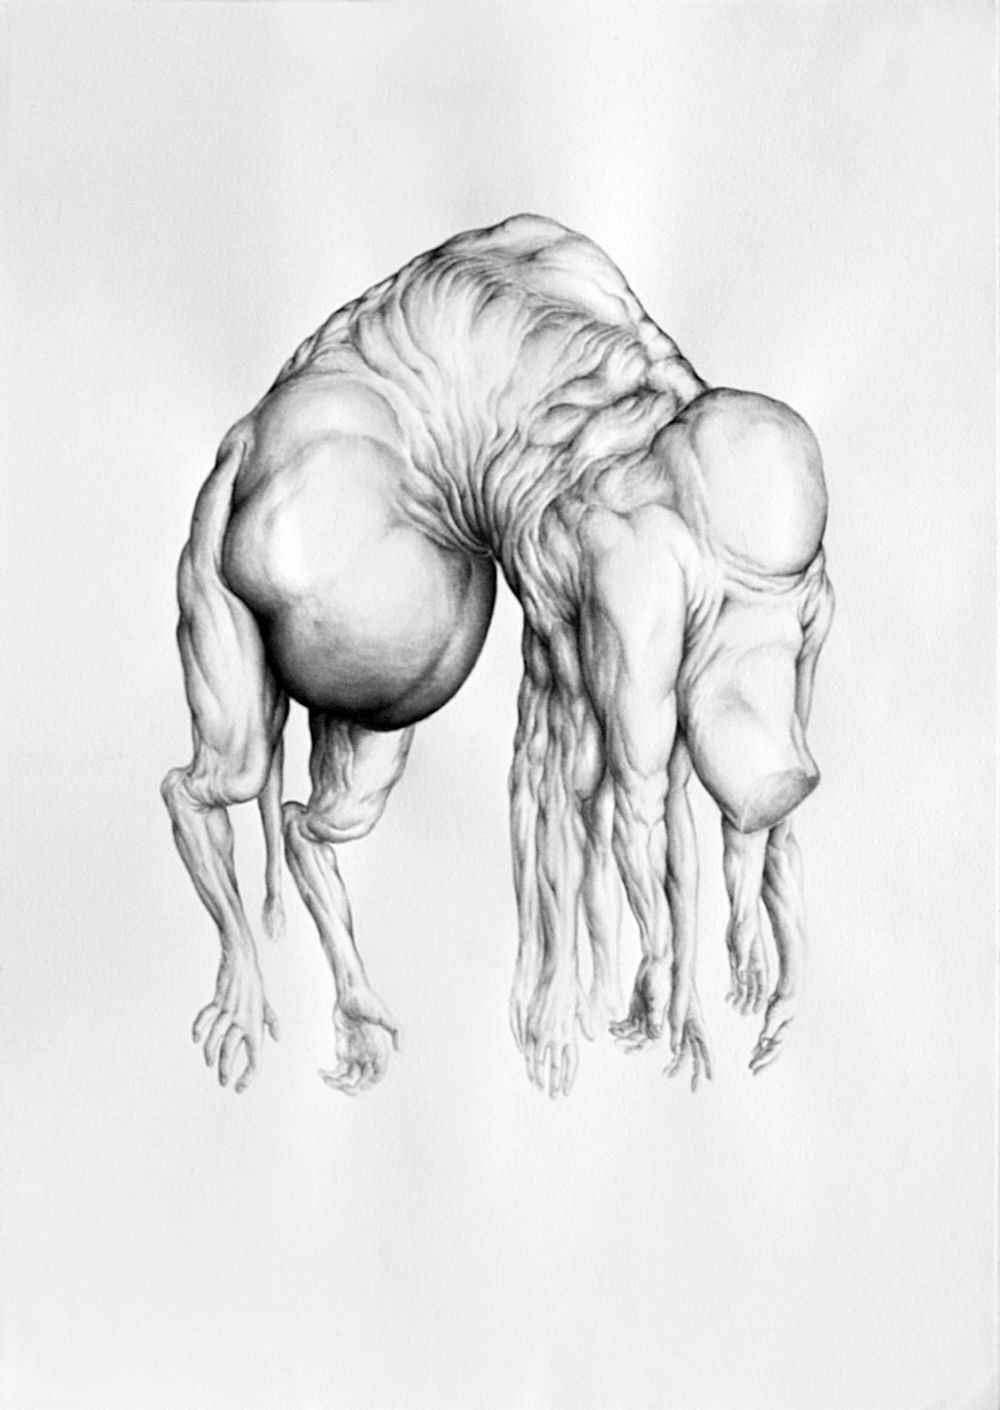 Planktonian People I, 2013, ink on paper, 16.5(h) x 23.25(w) inches